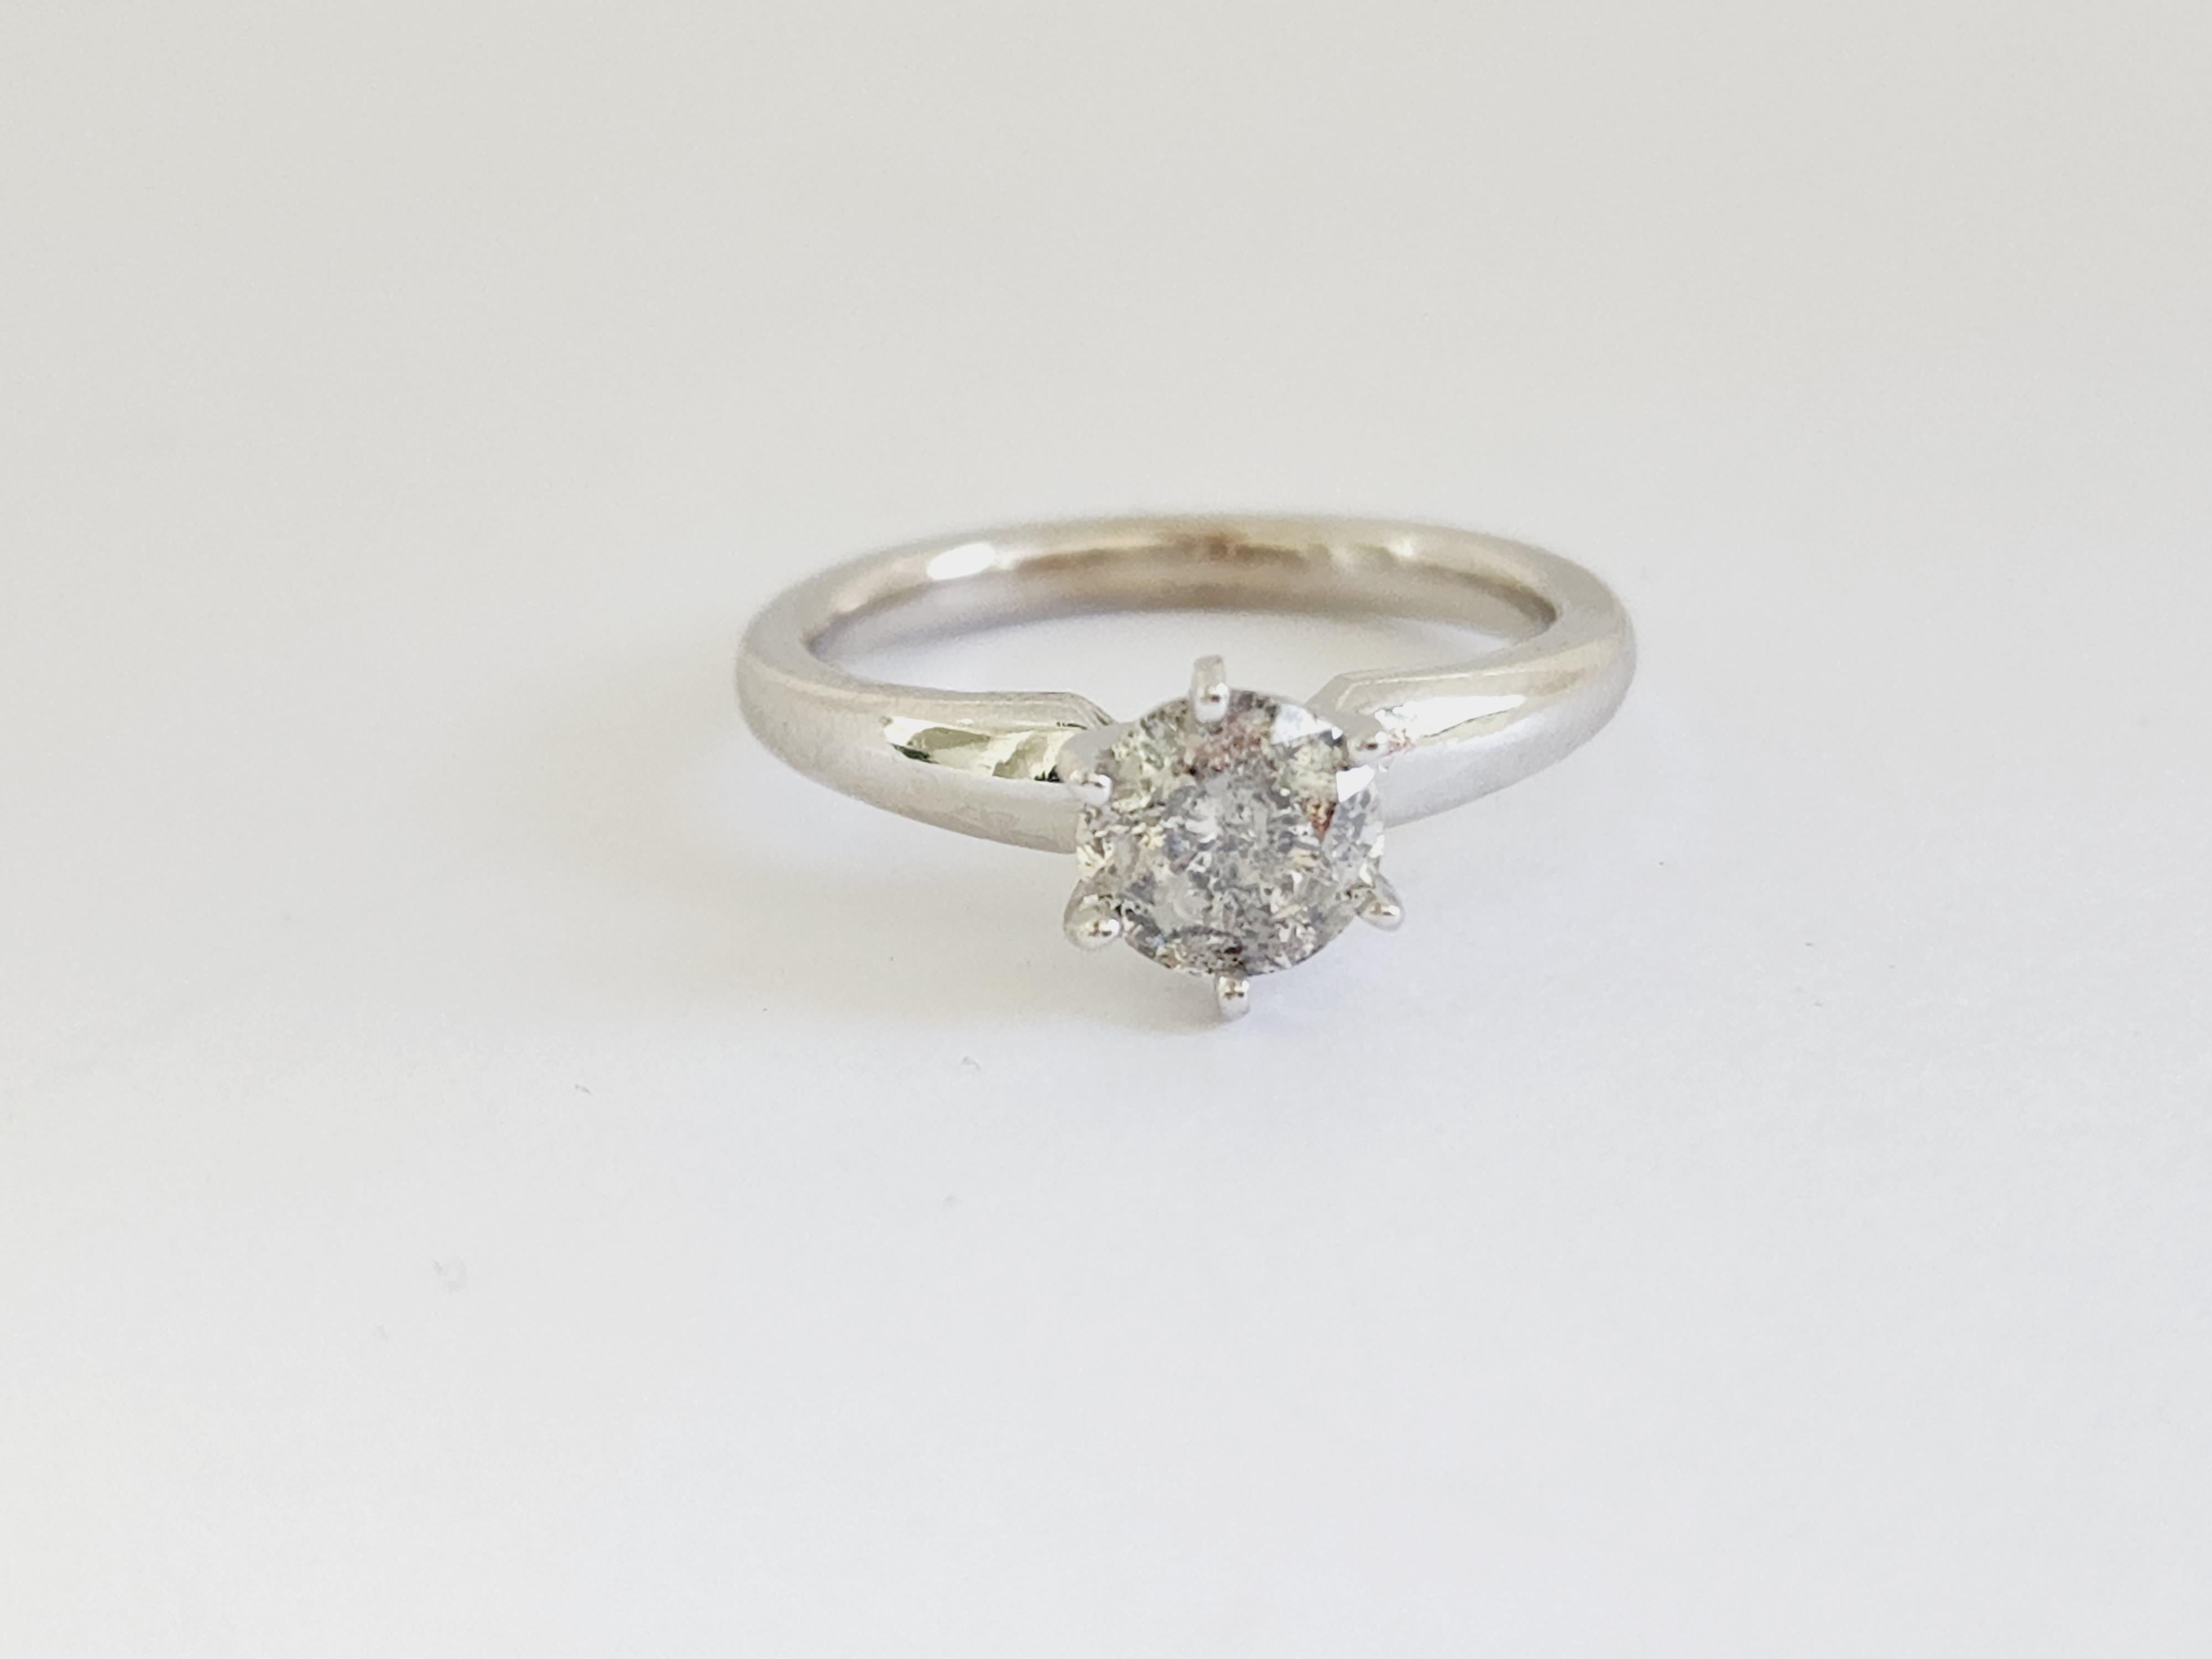 1.12 ct round brilliant cut natural diamonds. 6 prong solitaire setting, set in 14k white gold. 
Ring Size 7